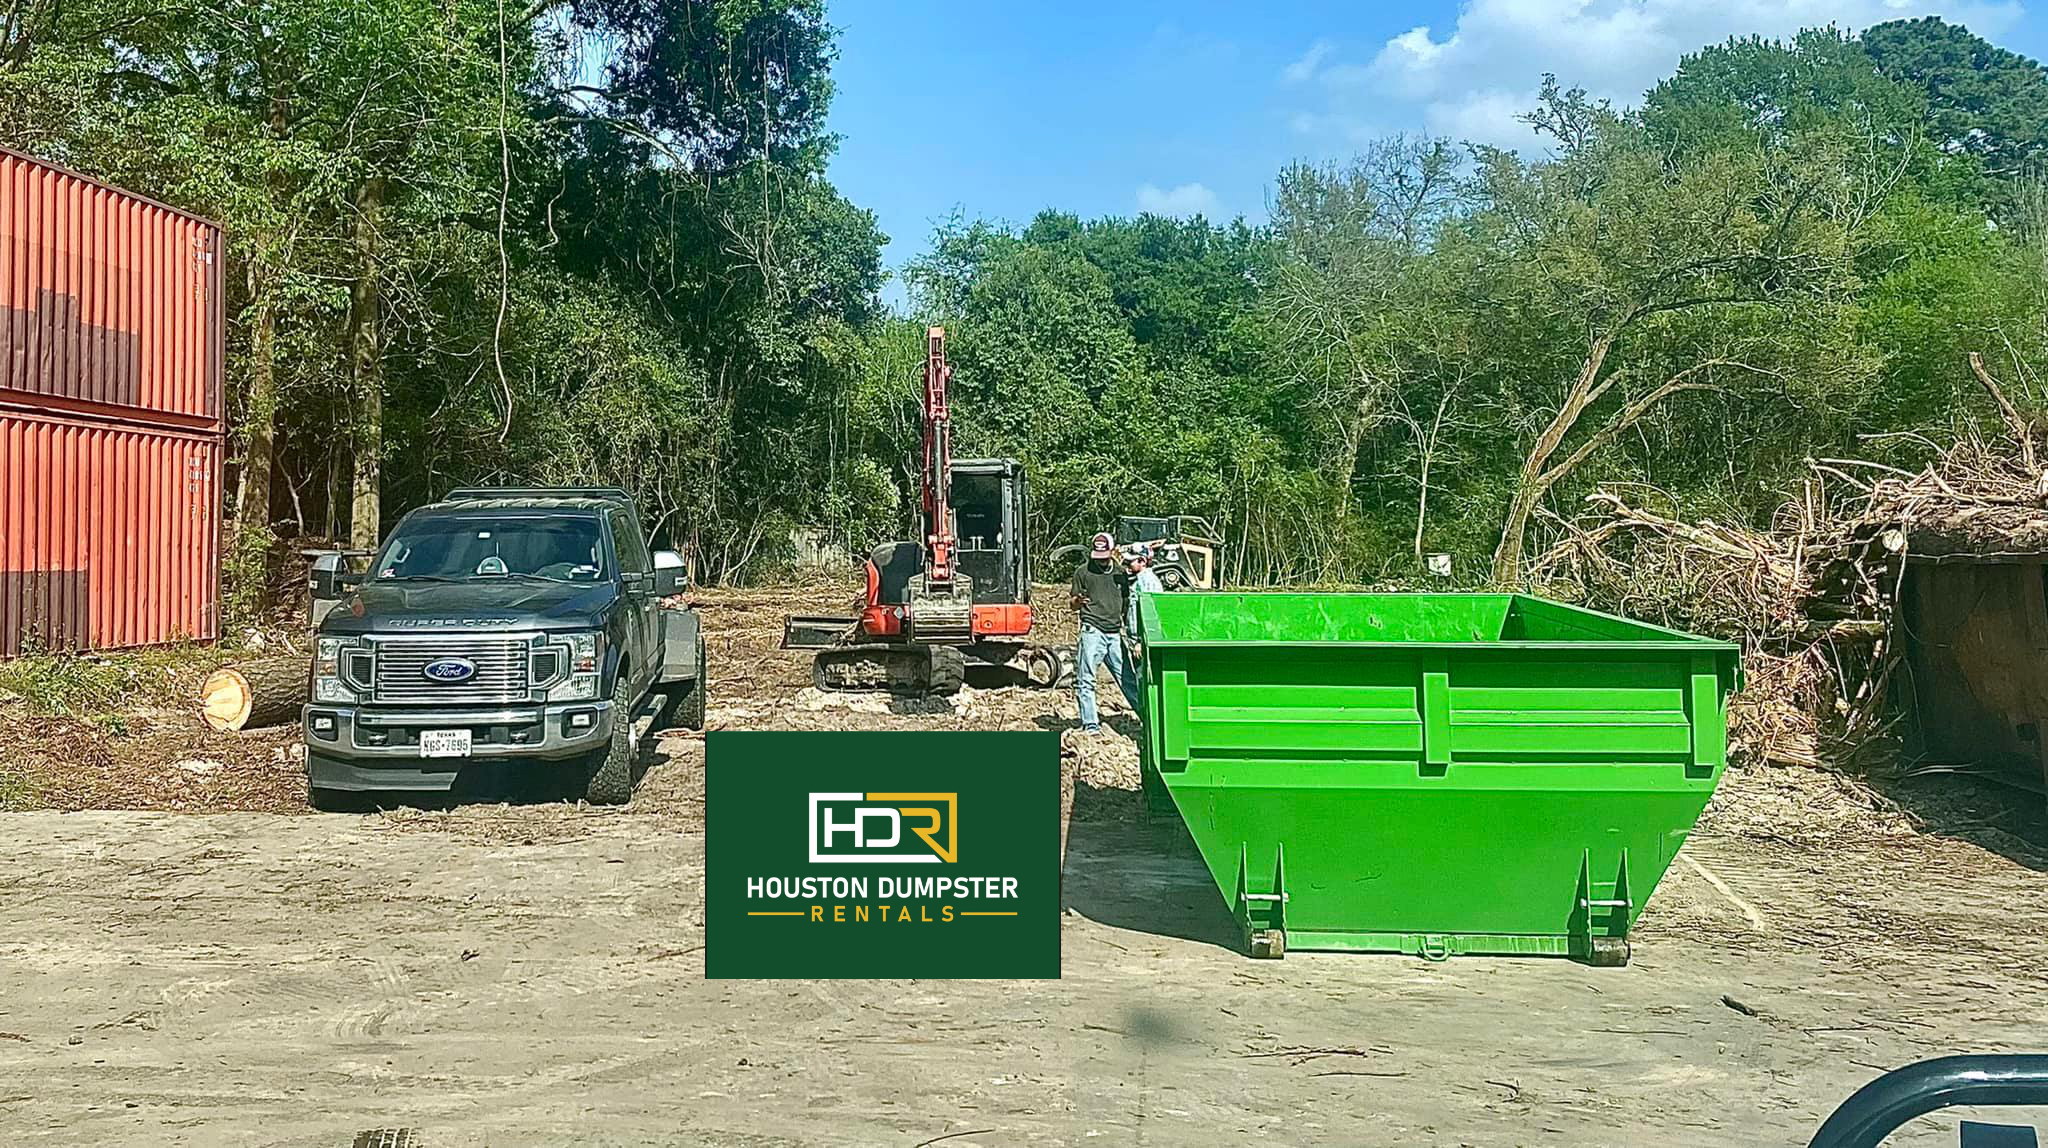 Residential Use Dumpster Rental HTX Dumpsters League City TX